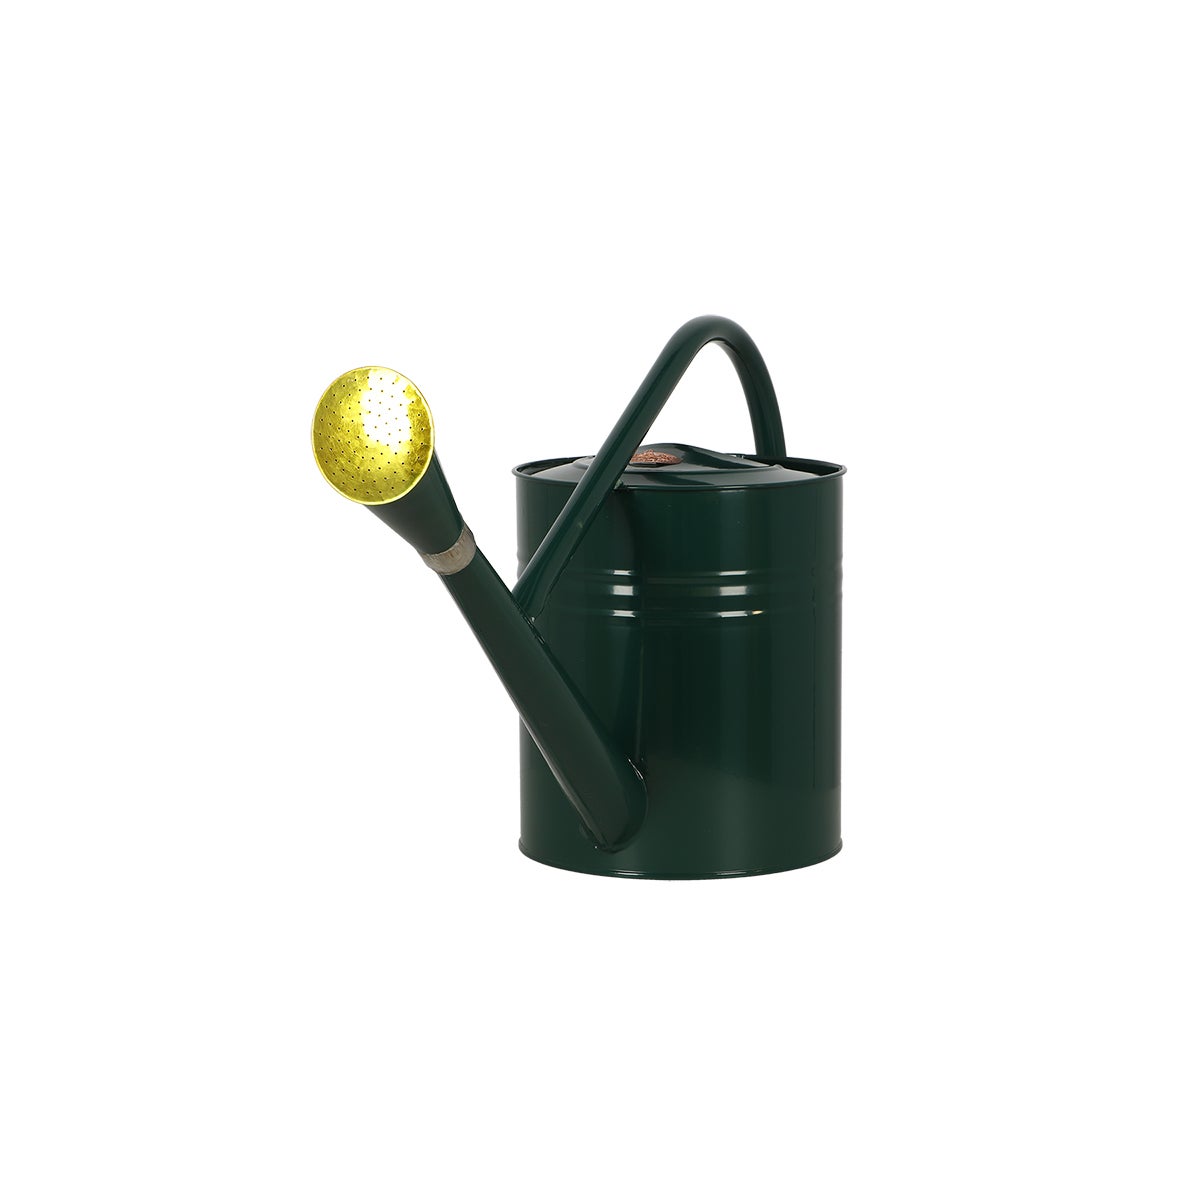 "Watering Can Green 7,5L"